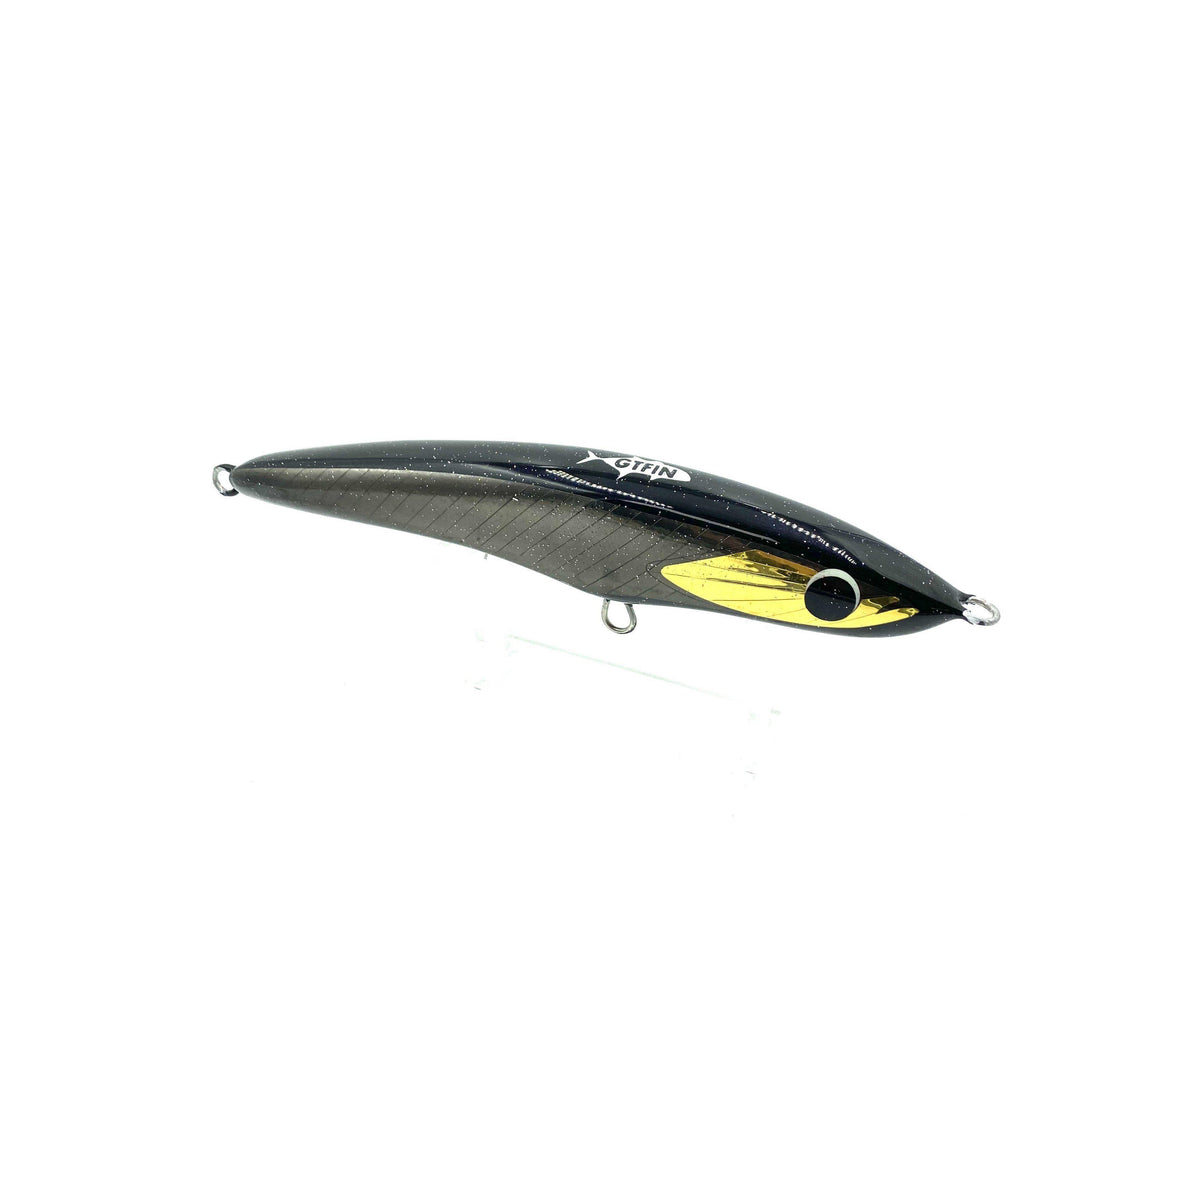 Product Review: Maria Loaded Floating / Sinking Pencil Bait - Japan Fishing  and Tackle News